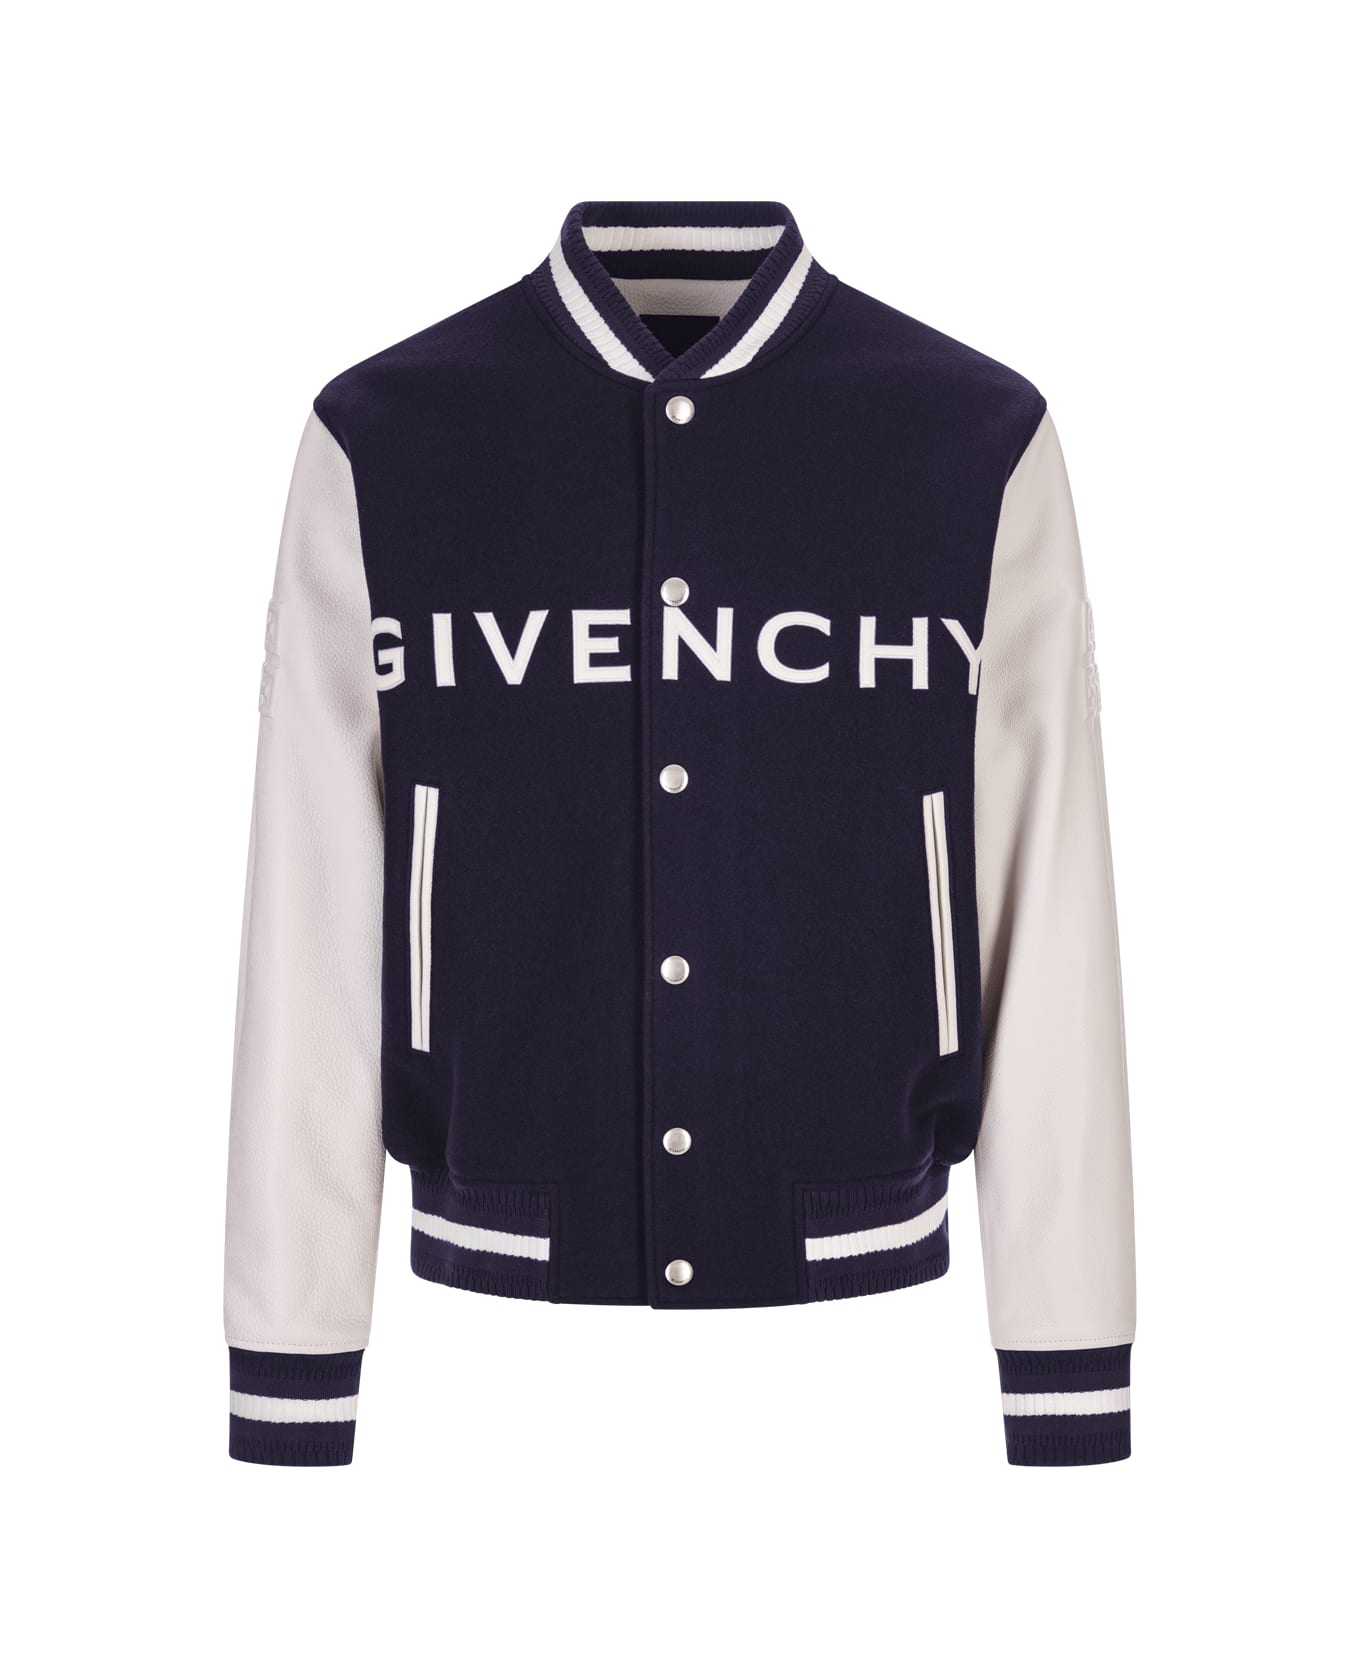 Givenchy Bomber Jacket In Wool And Leather - Blue